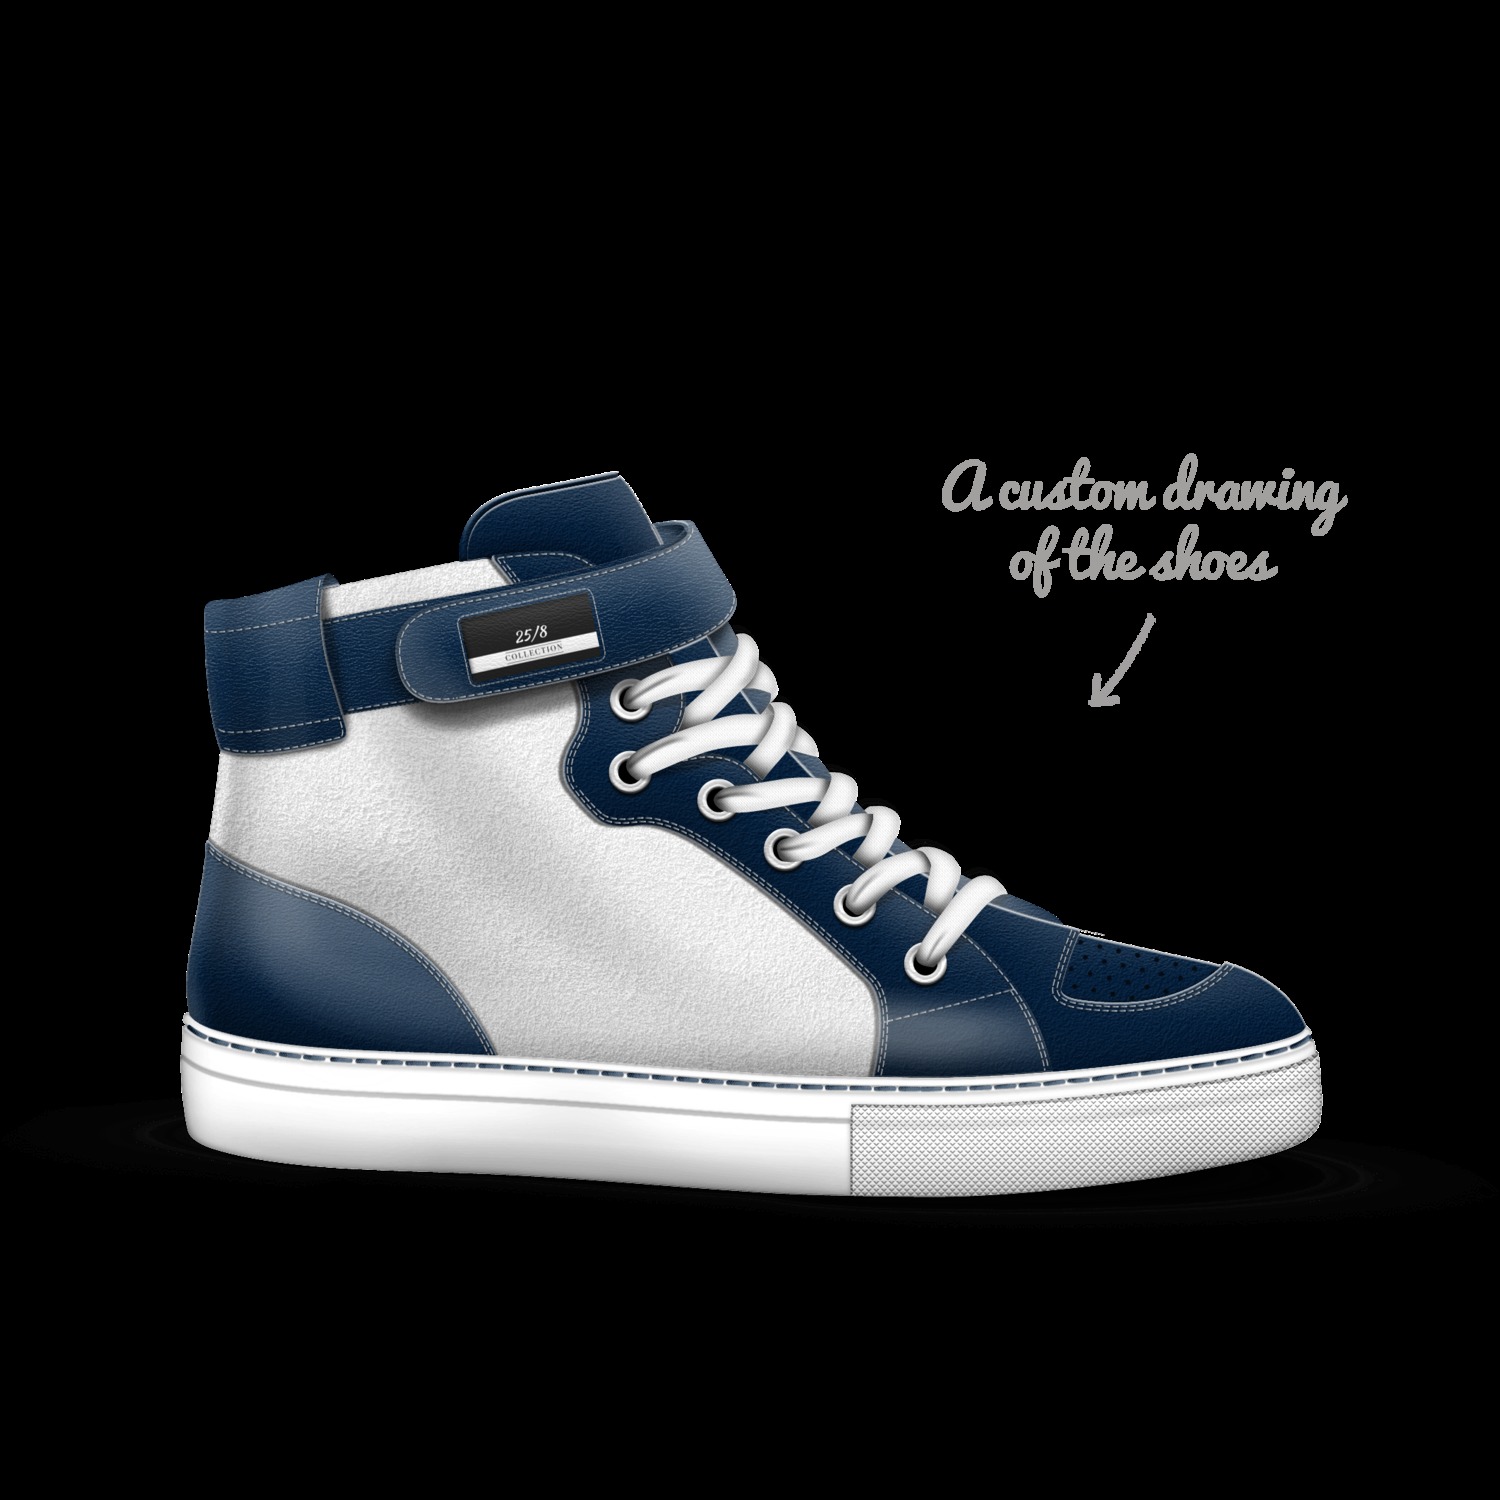 25/8's | A Custom Shoe concept by J Stone